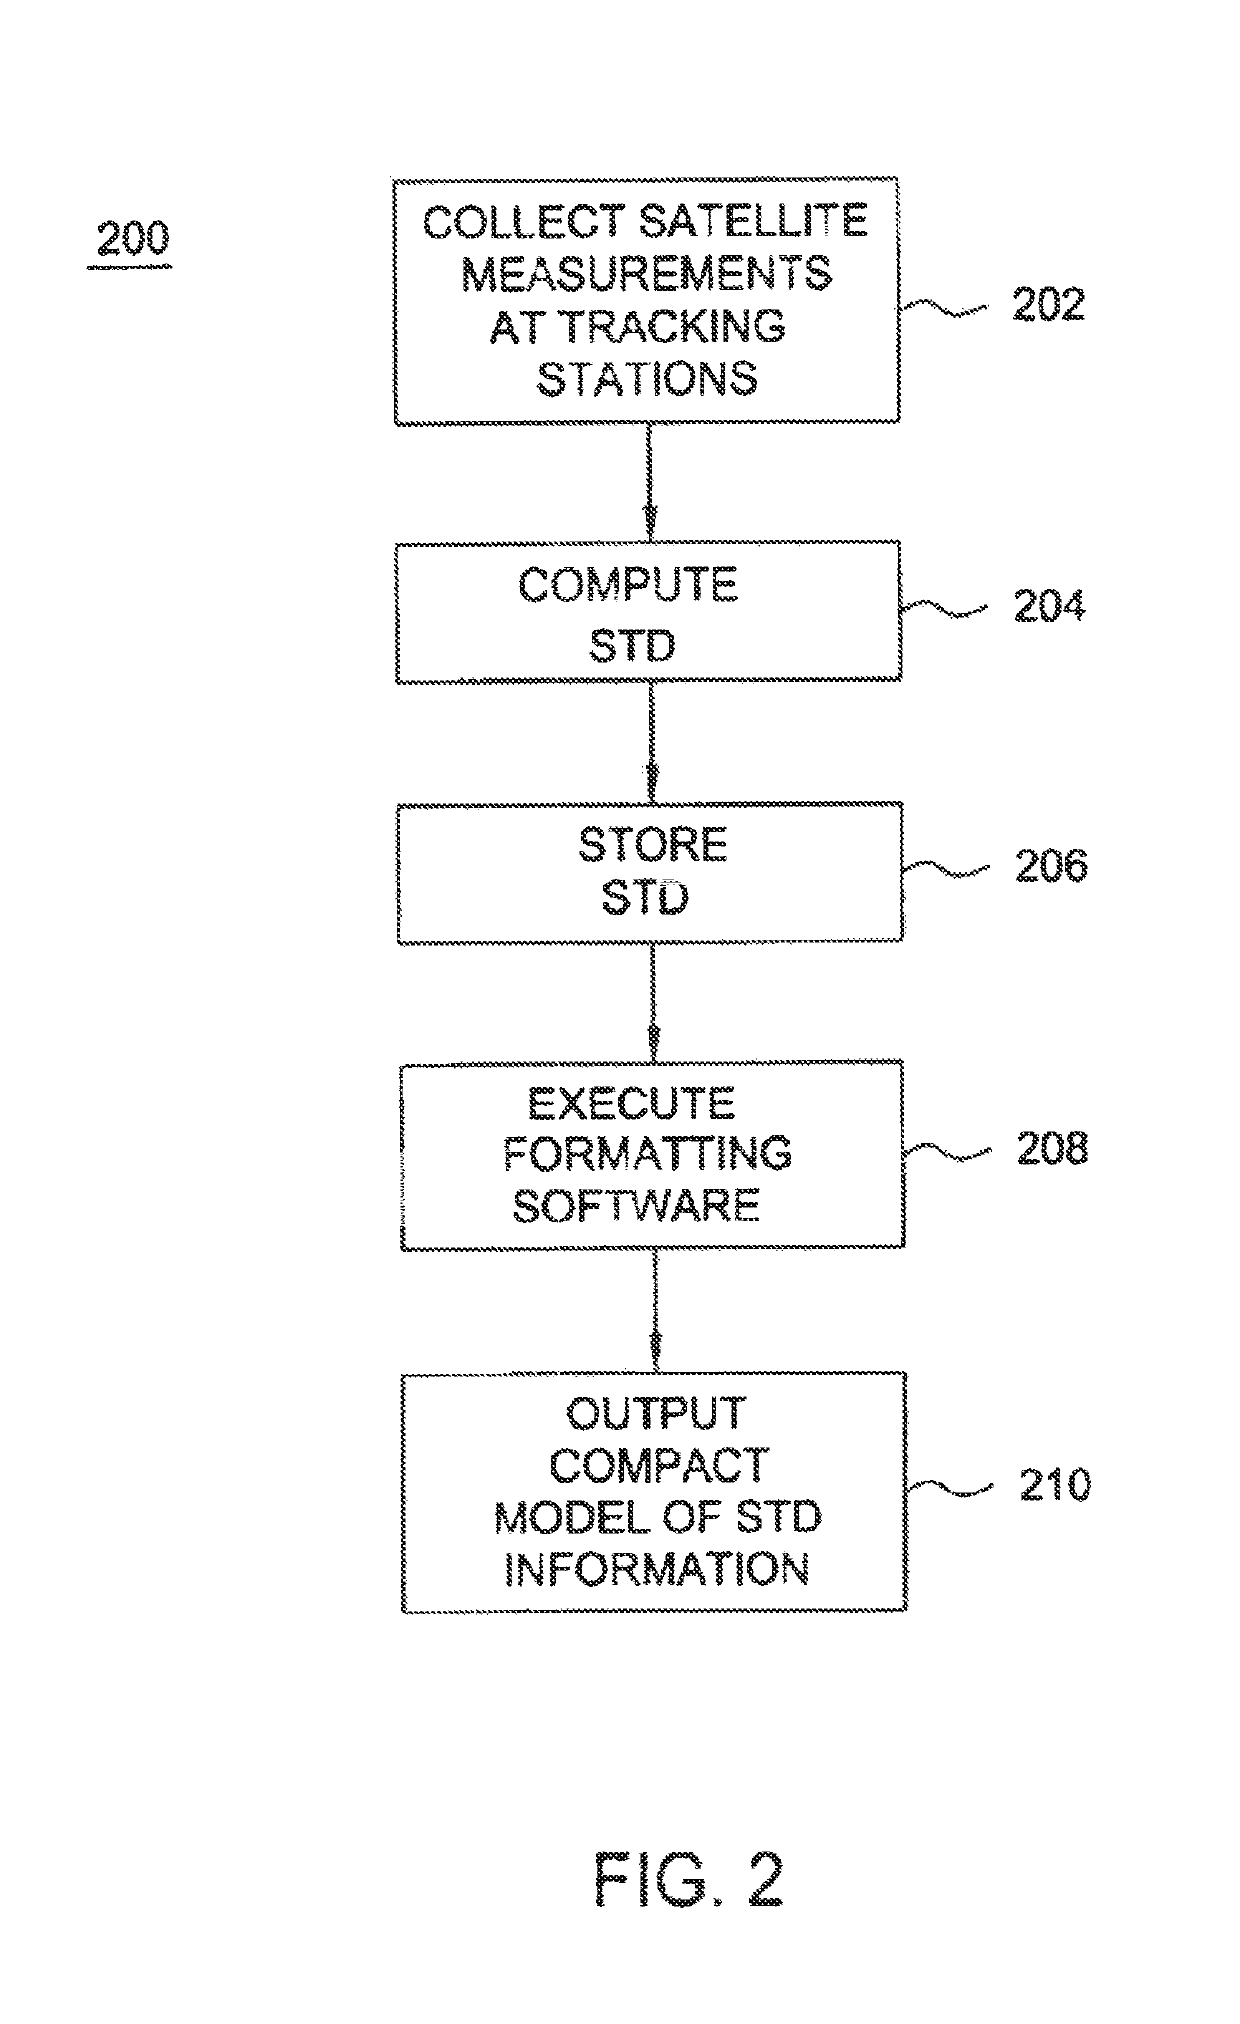 Method and apparatus for generating and distributing satellite tracking information in a compact format